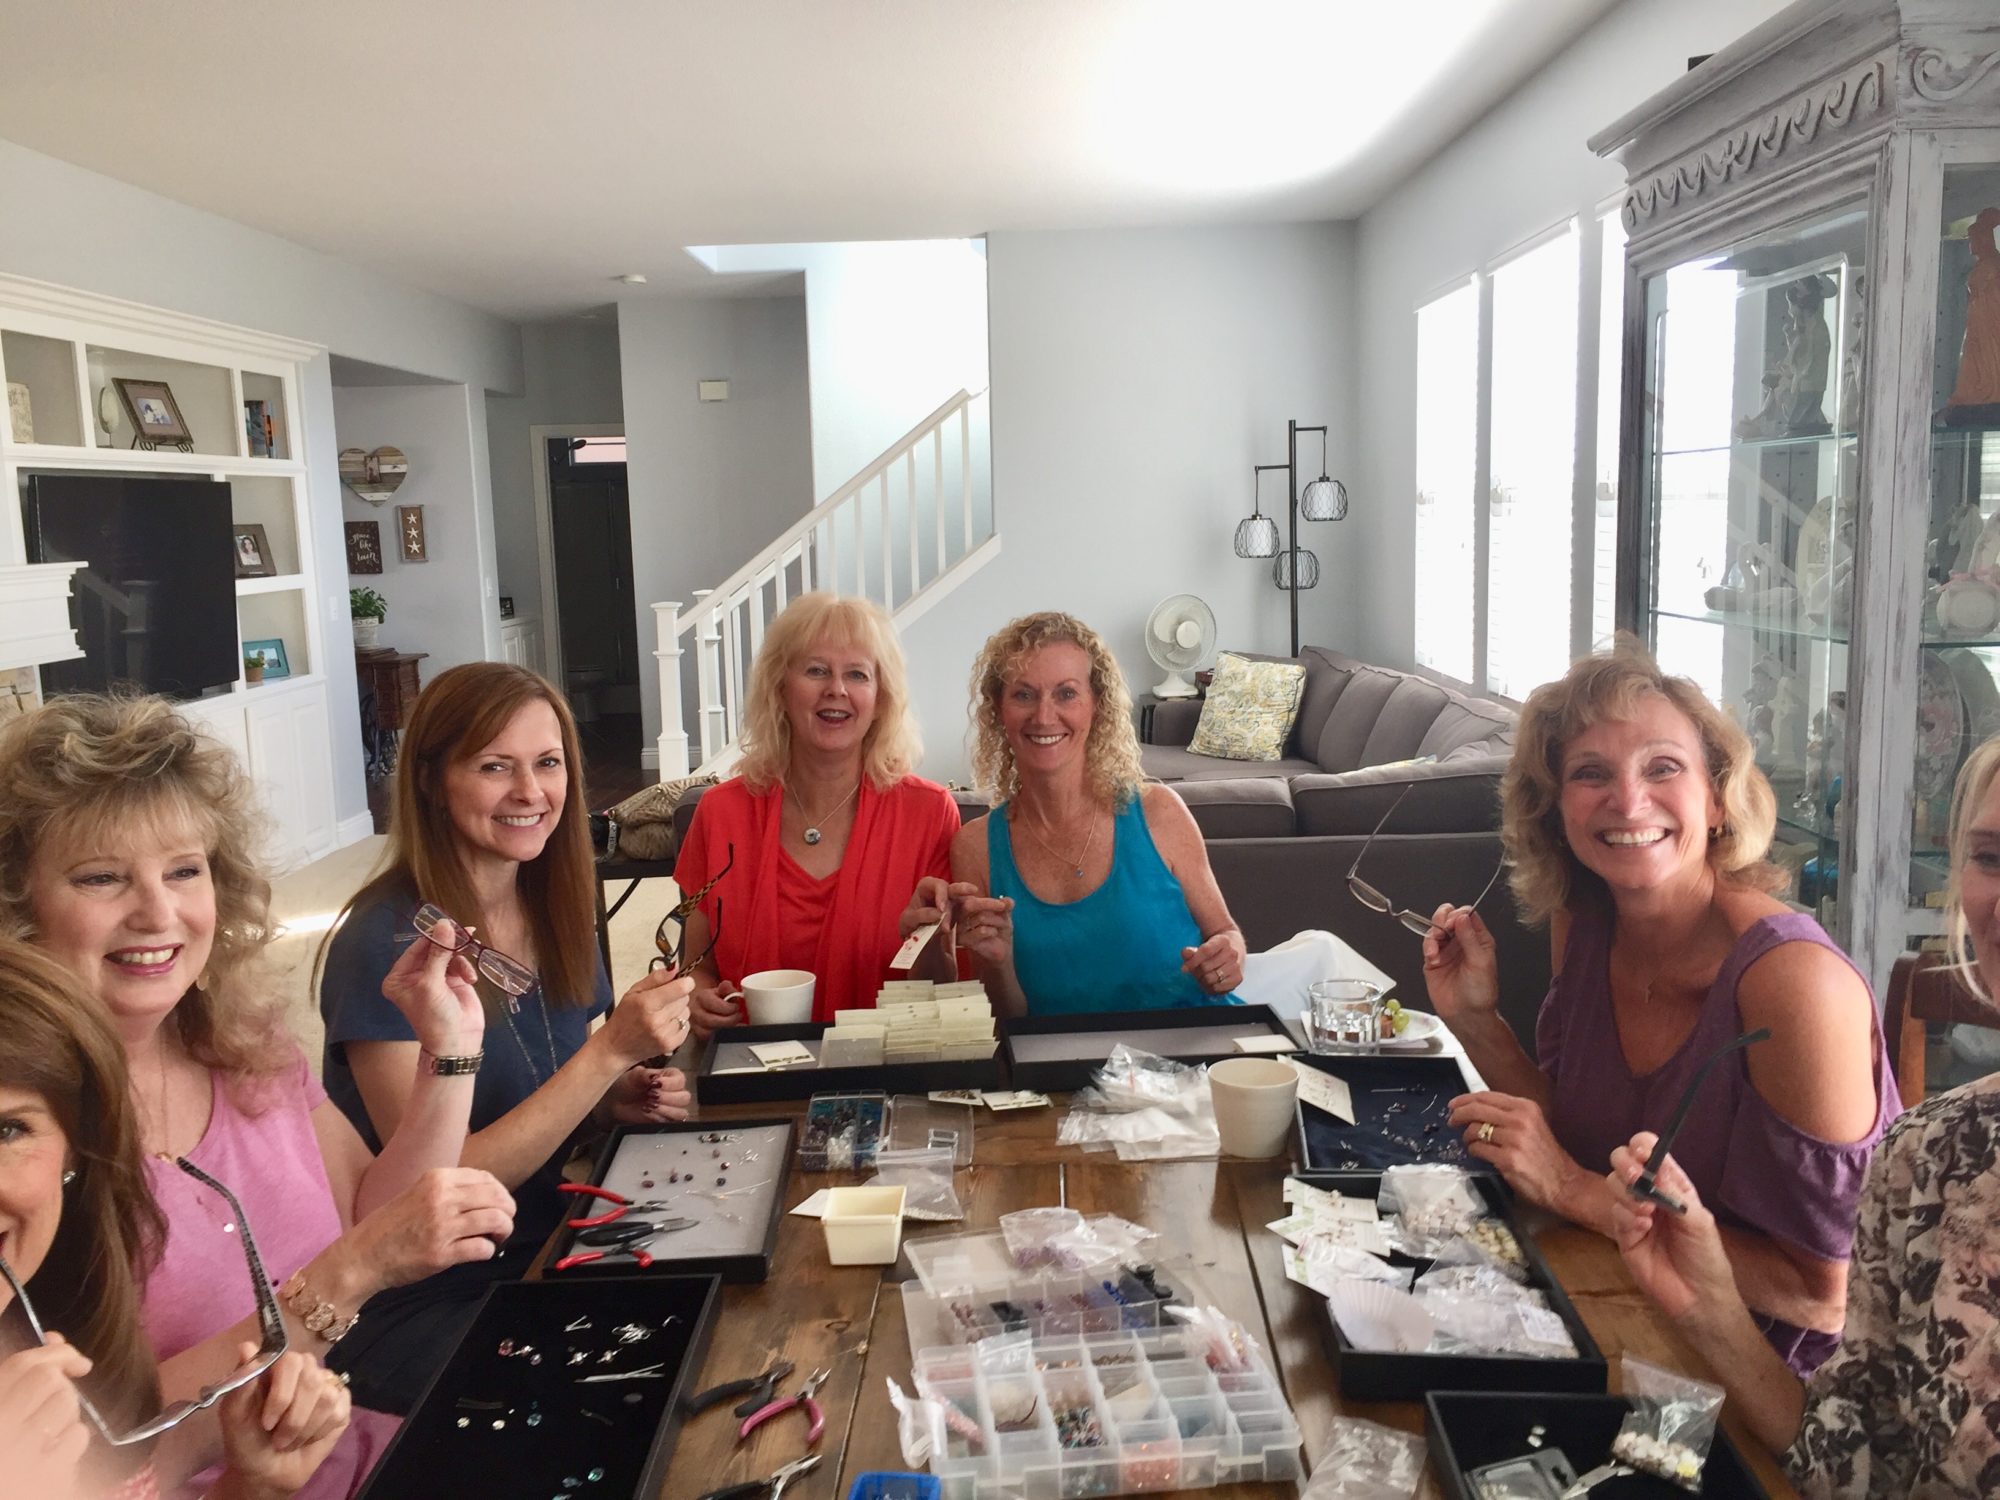 Jewelry Making to Support Adoption - Home for Good Foundation - Monday AM